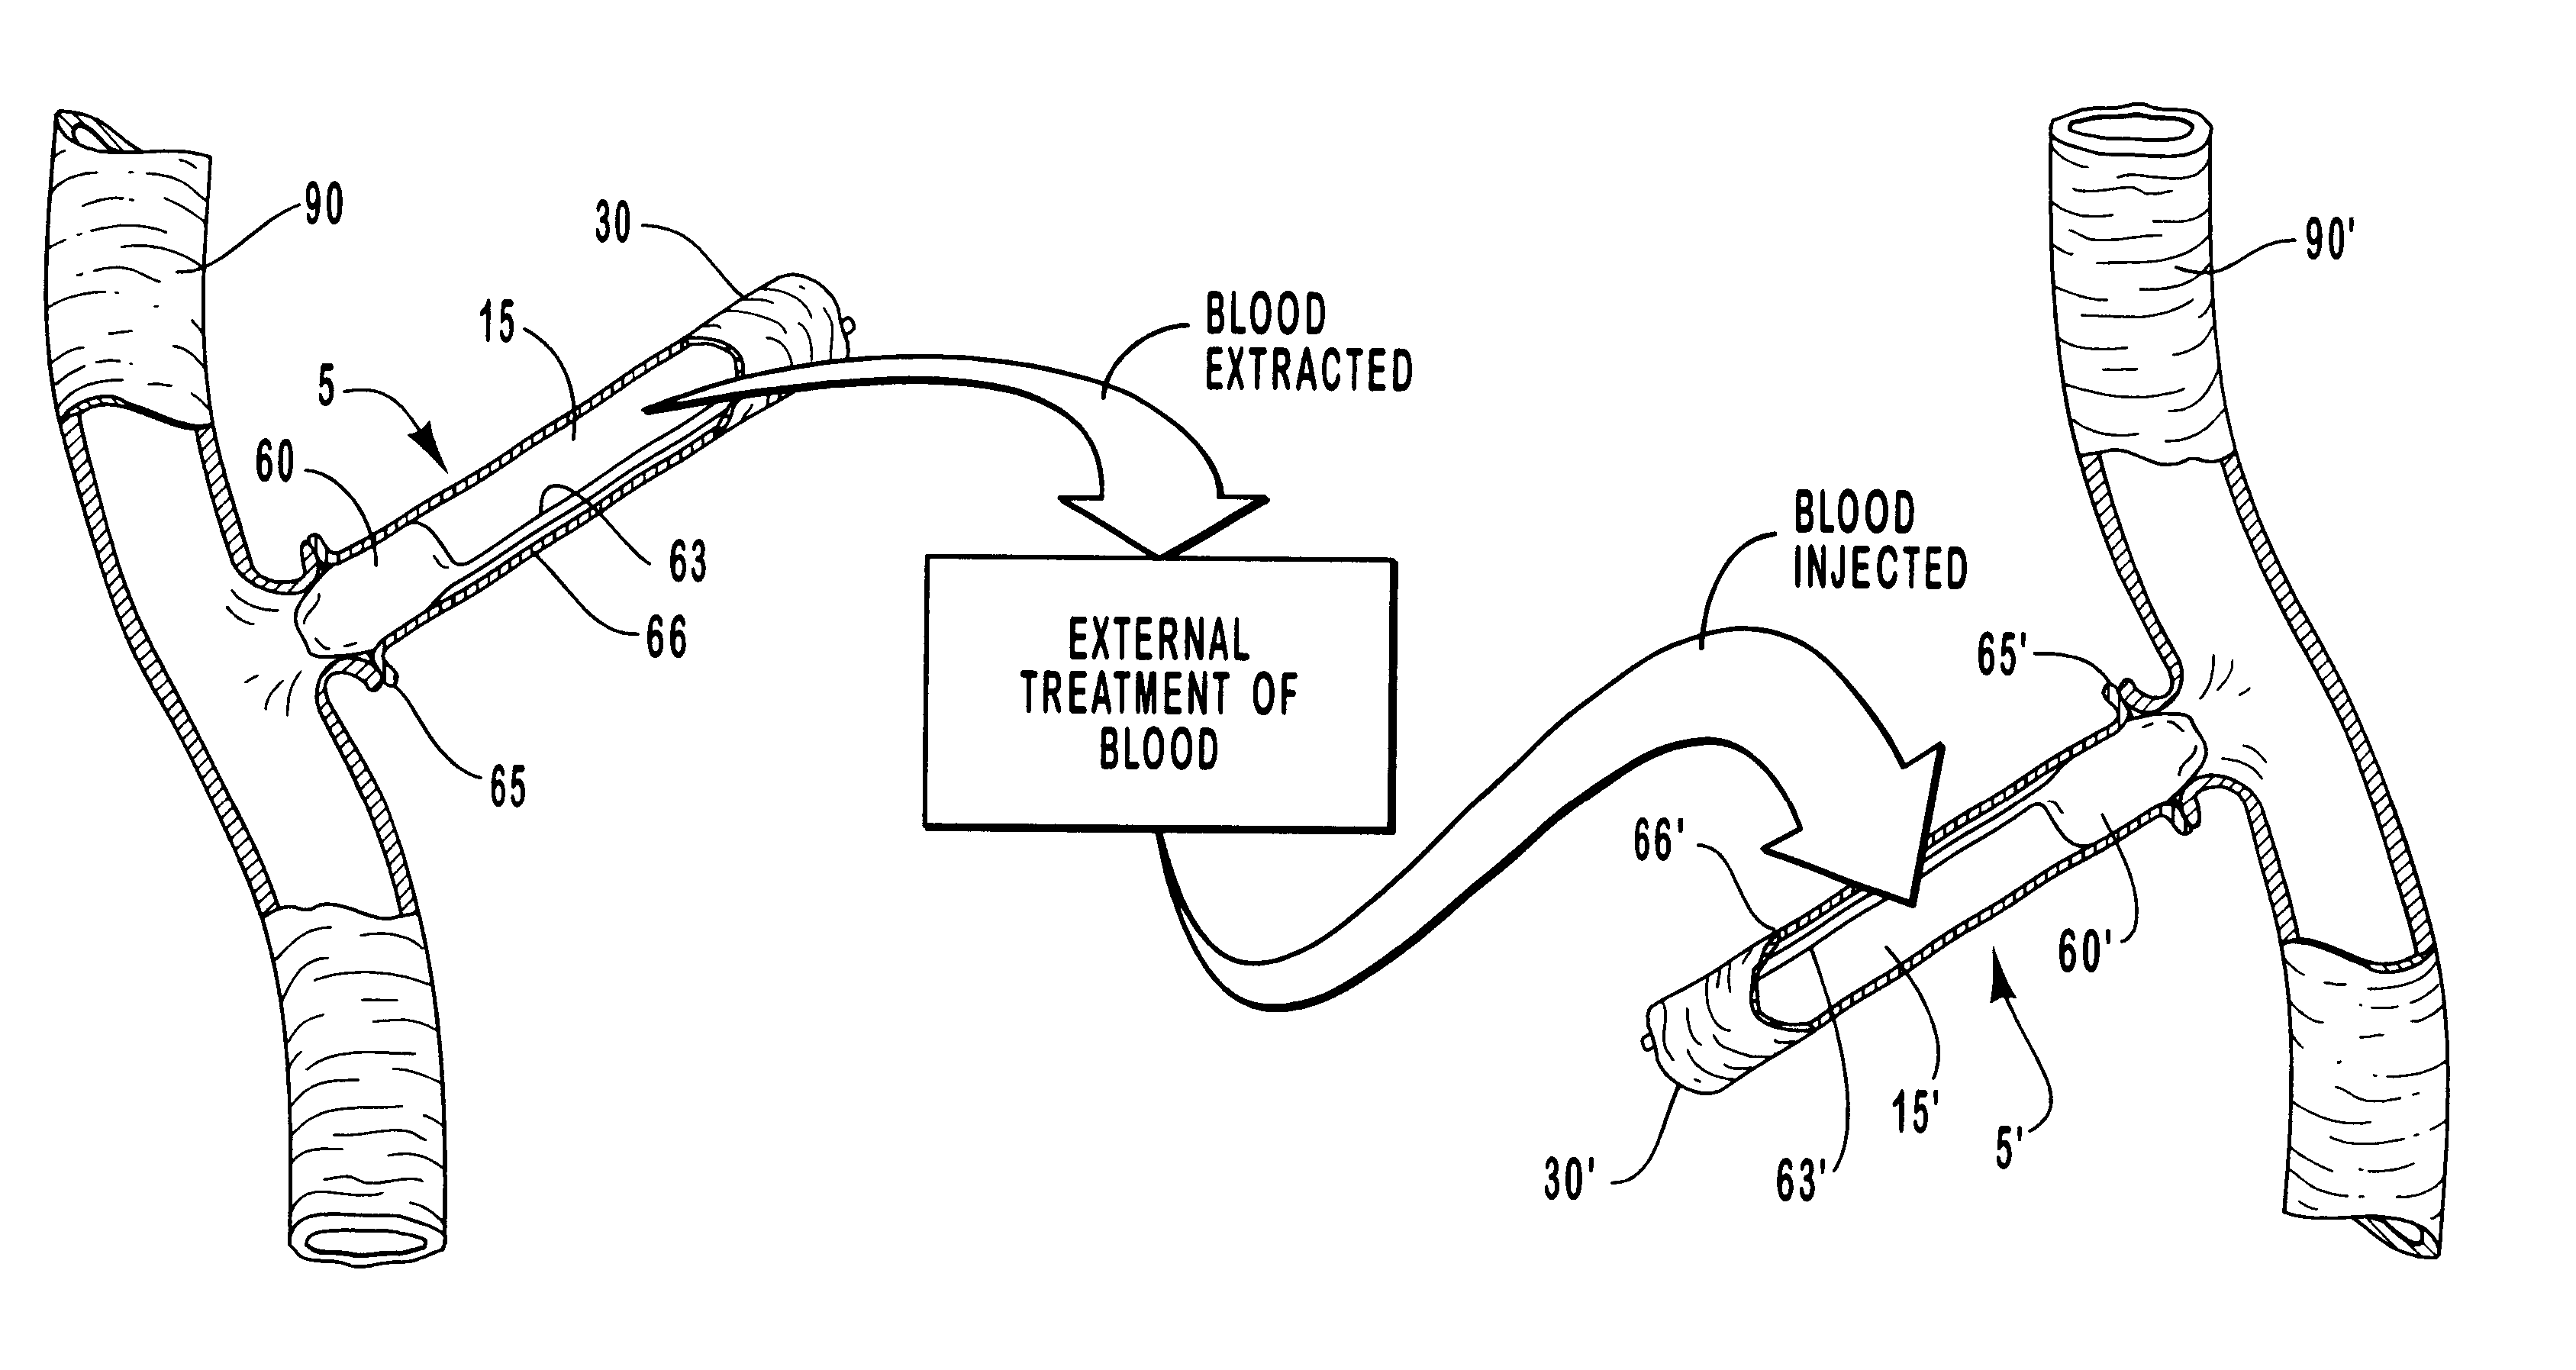 Methods for external treatment of blood